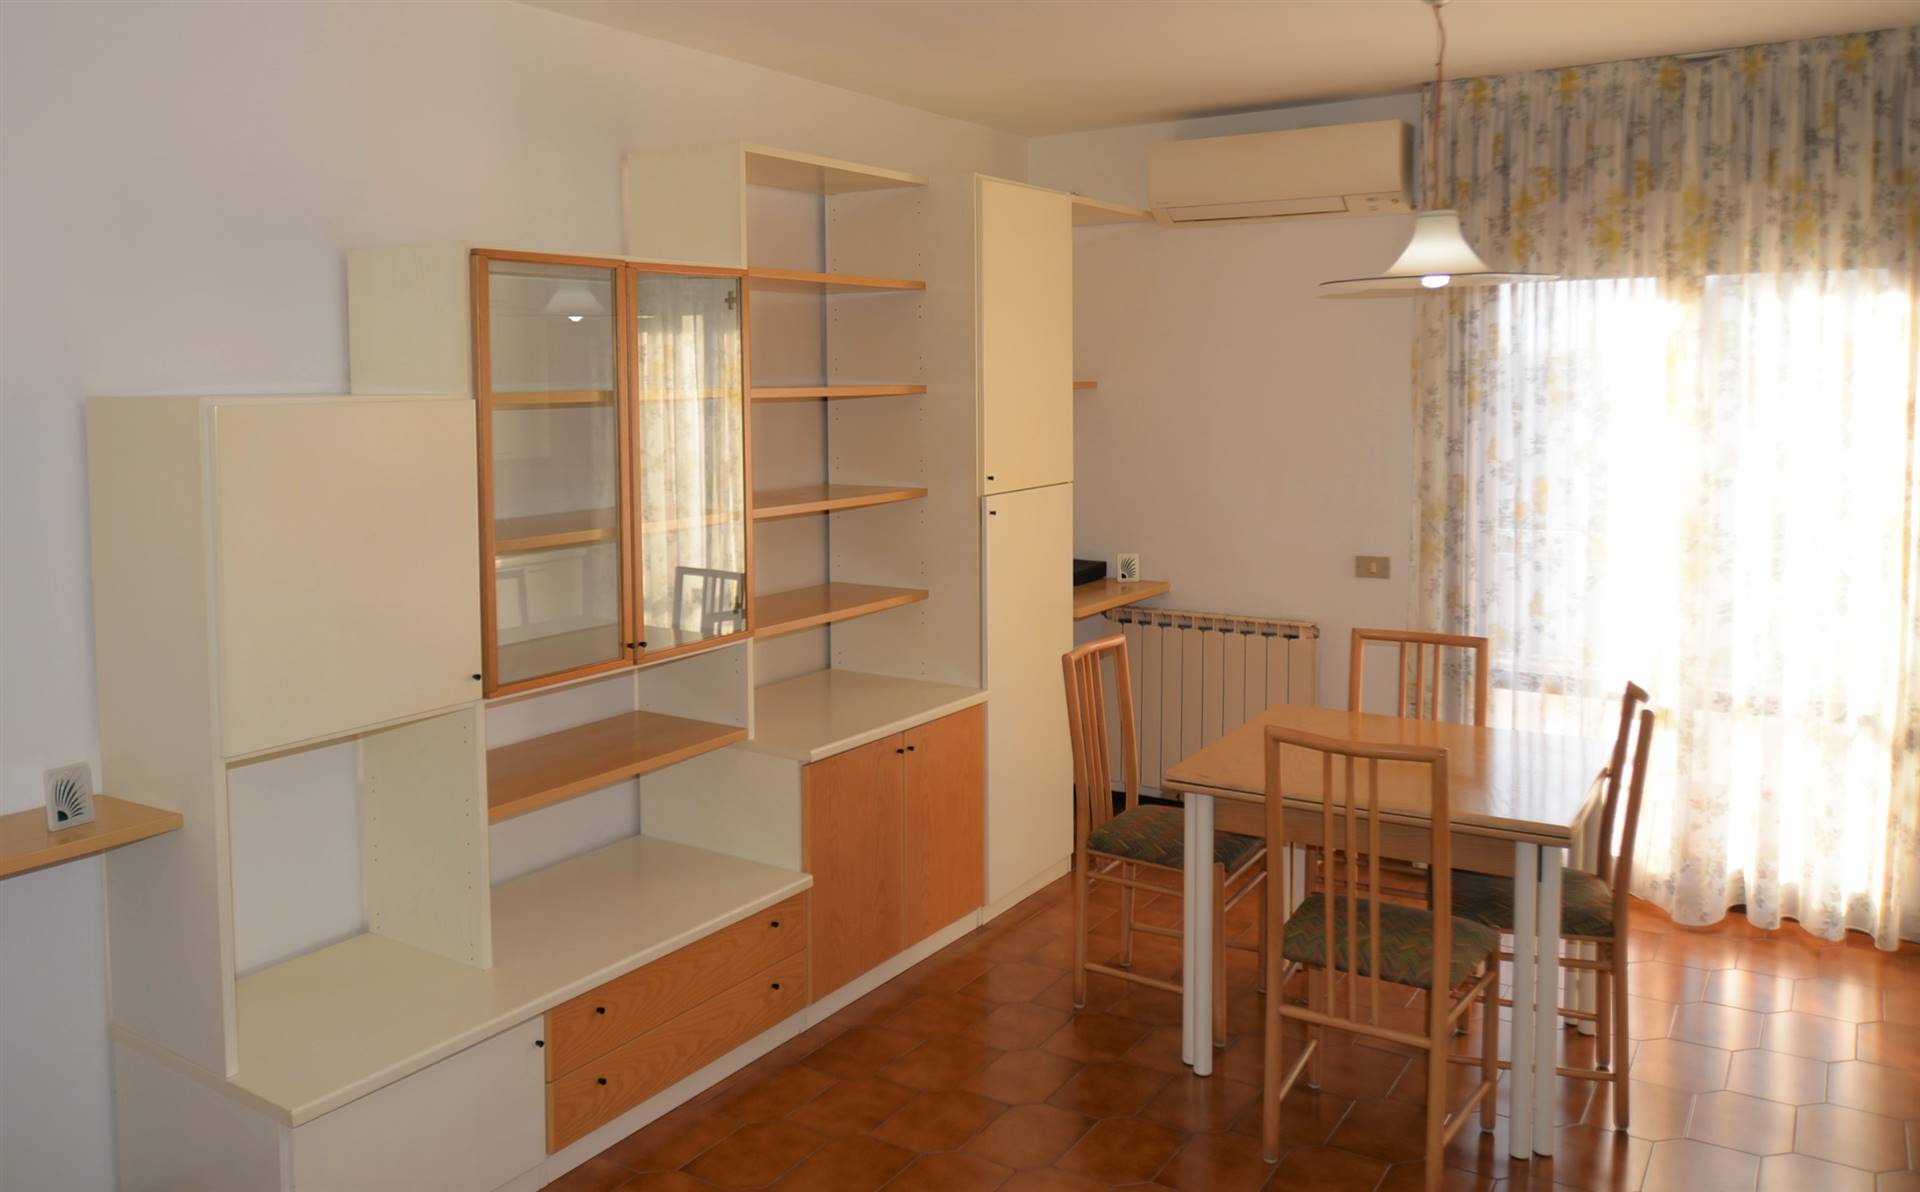 SALZANO, Apartment for sale, Habitable, Heating Individual heating system, Energetic class: F, Epi: 173,4 kwh/m2 year, placed at 2° on 3, composed by: 2 Rooms, Kitchenette, , 1 Bedroom, 1 Bathroom, 